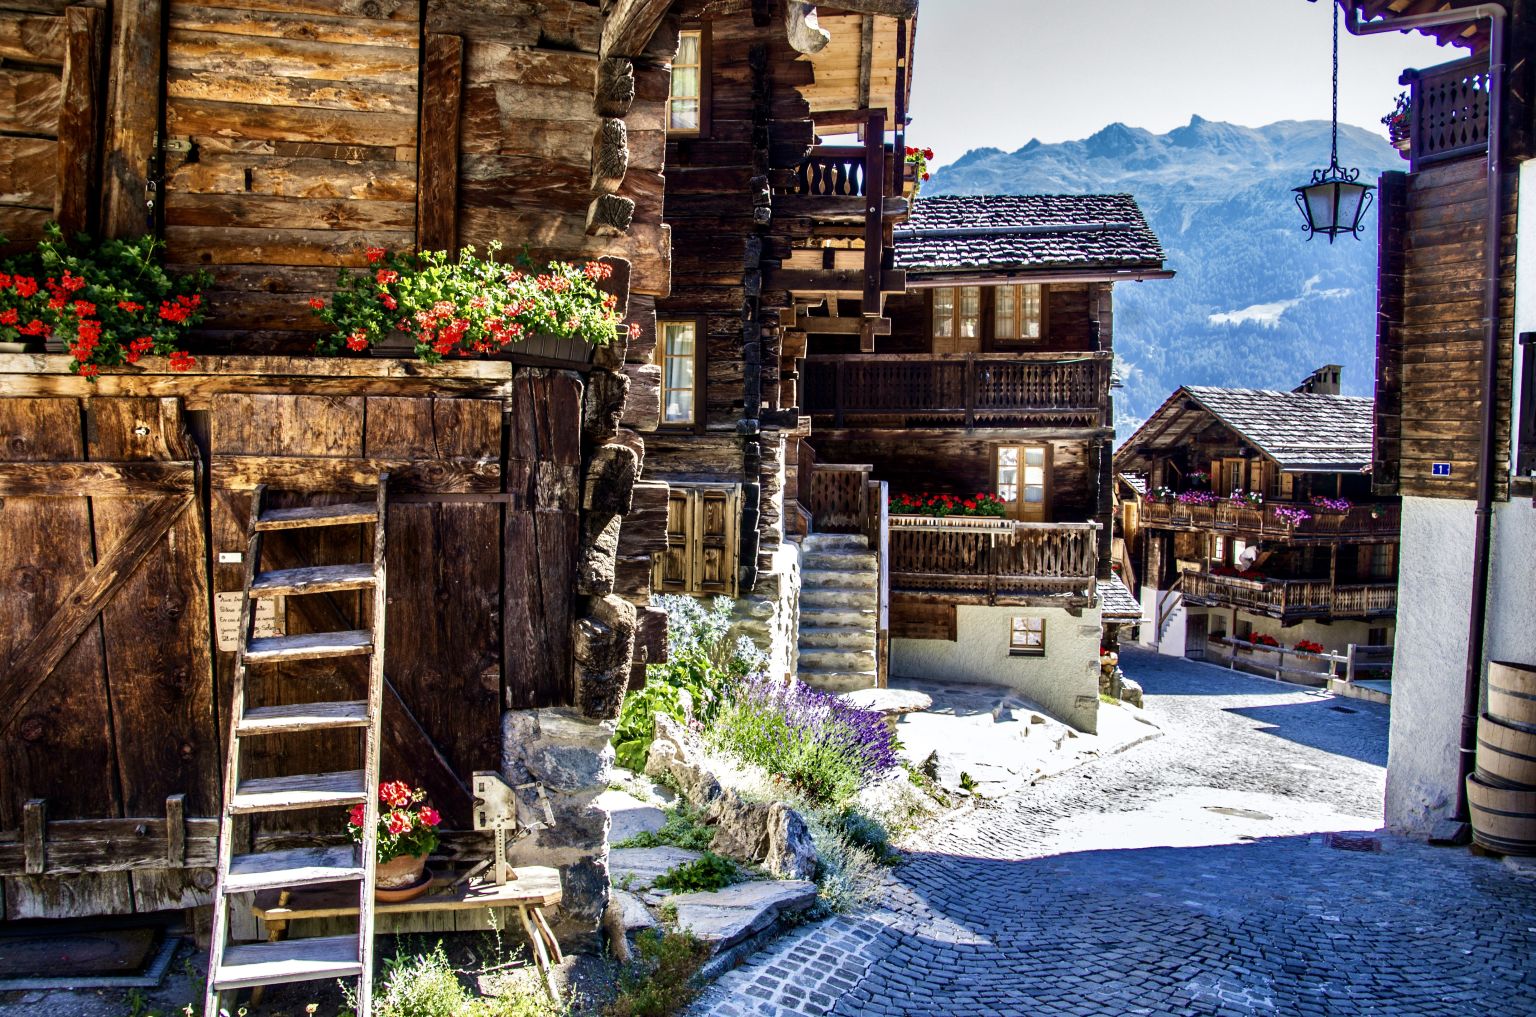 With a stroll through the narrow cobbled streets of the enchanting village of Grimentz, Valais, Switzerland.